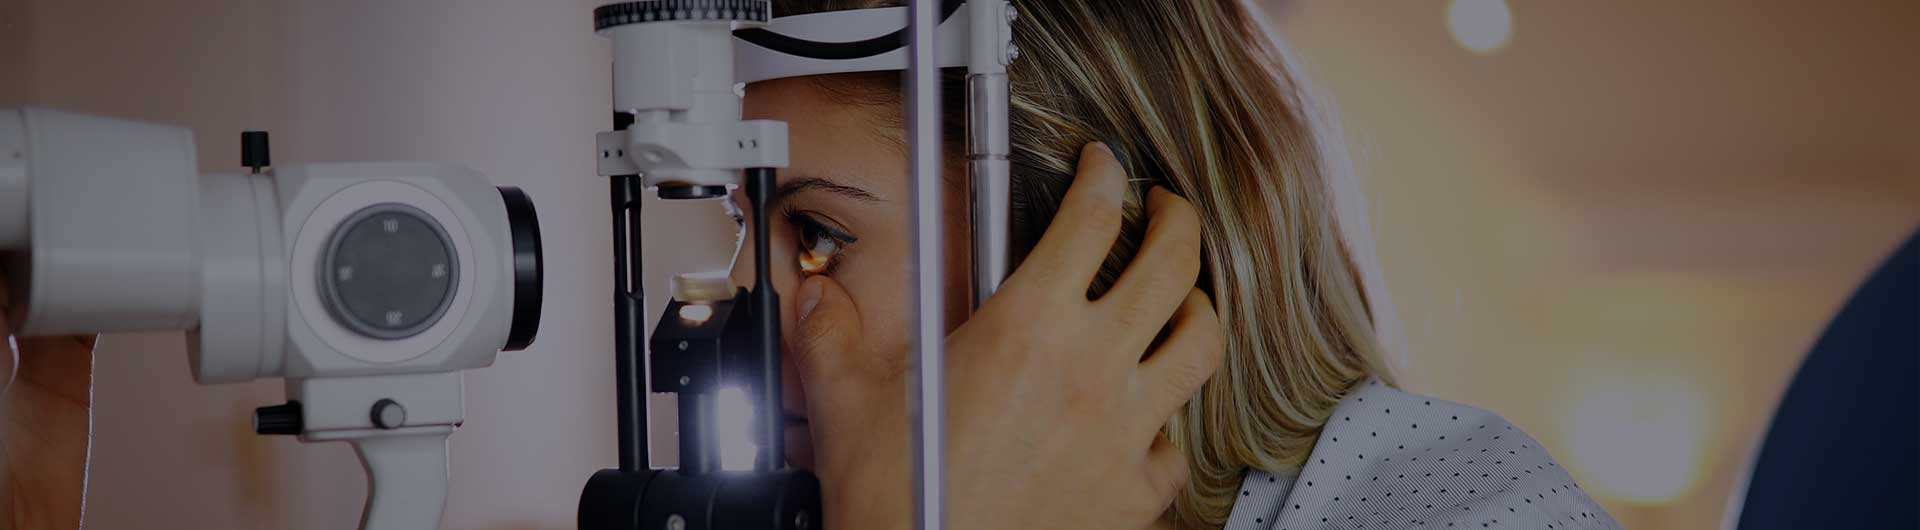 Optometrist checking patient eyesight and vision correction.